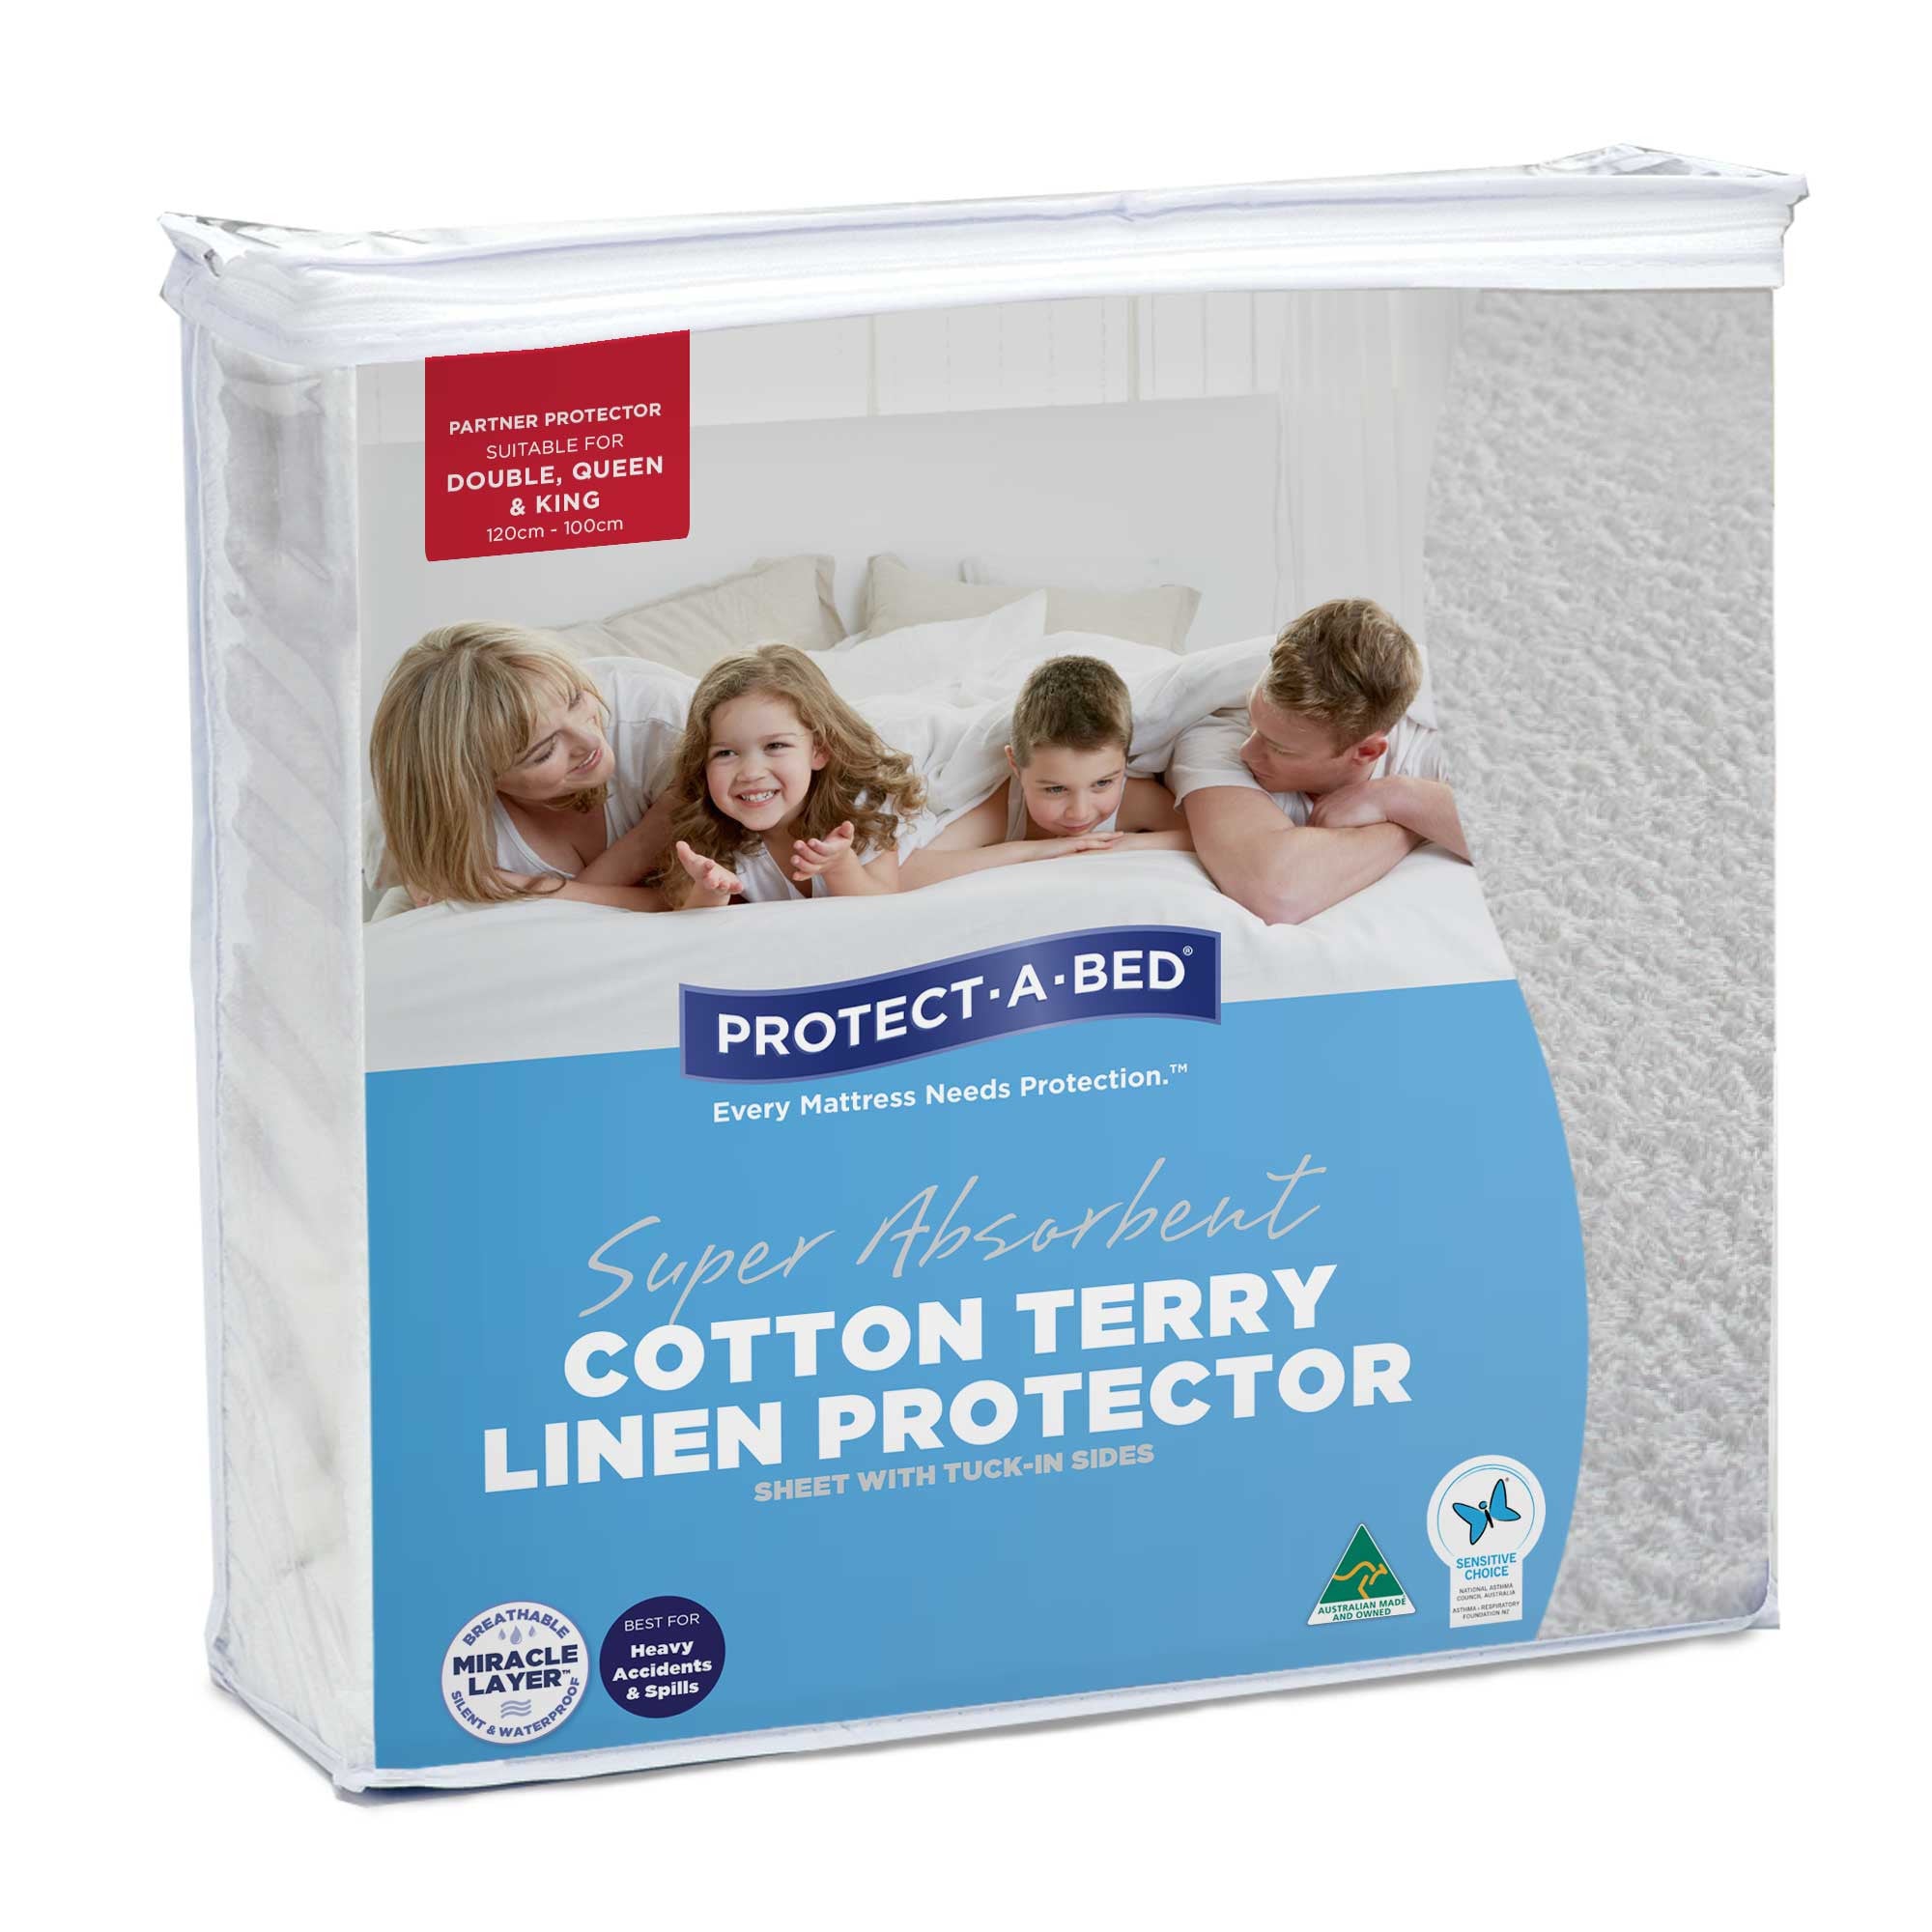 Cotton Terry Linen Protectors - Protect-A-Bed